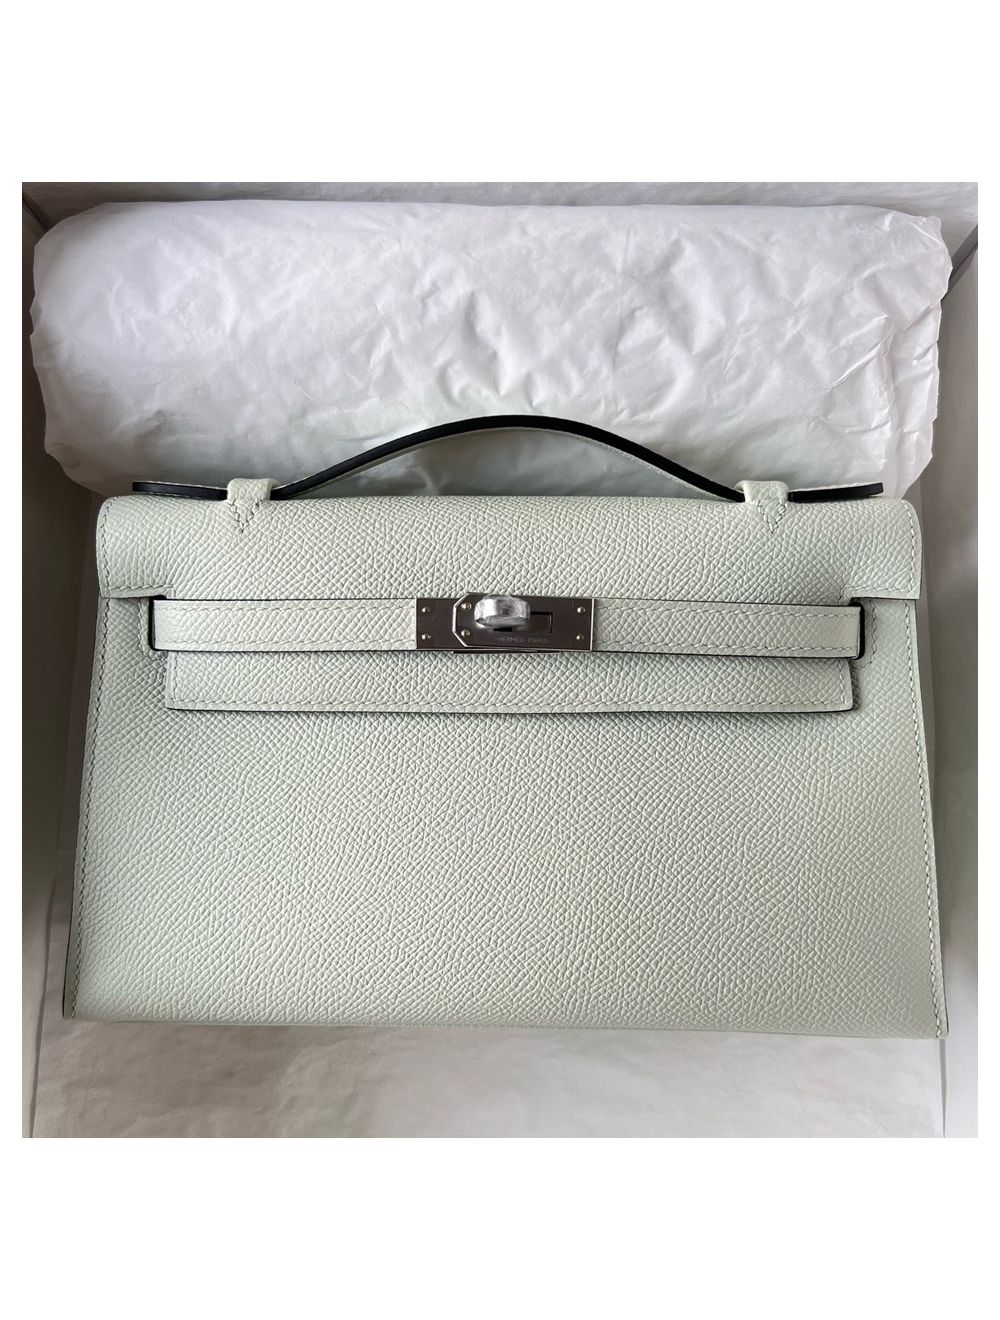 Brand New Hermes Kelly Depeches 25 Pouch vert Rousseau Calfskin Leather